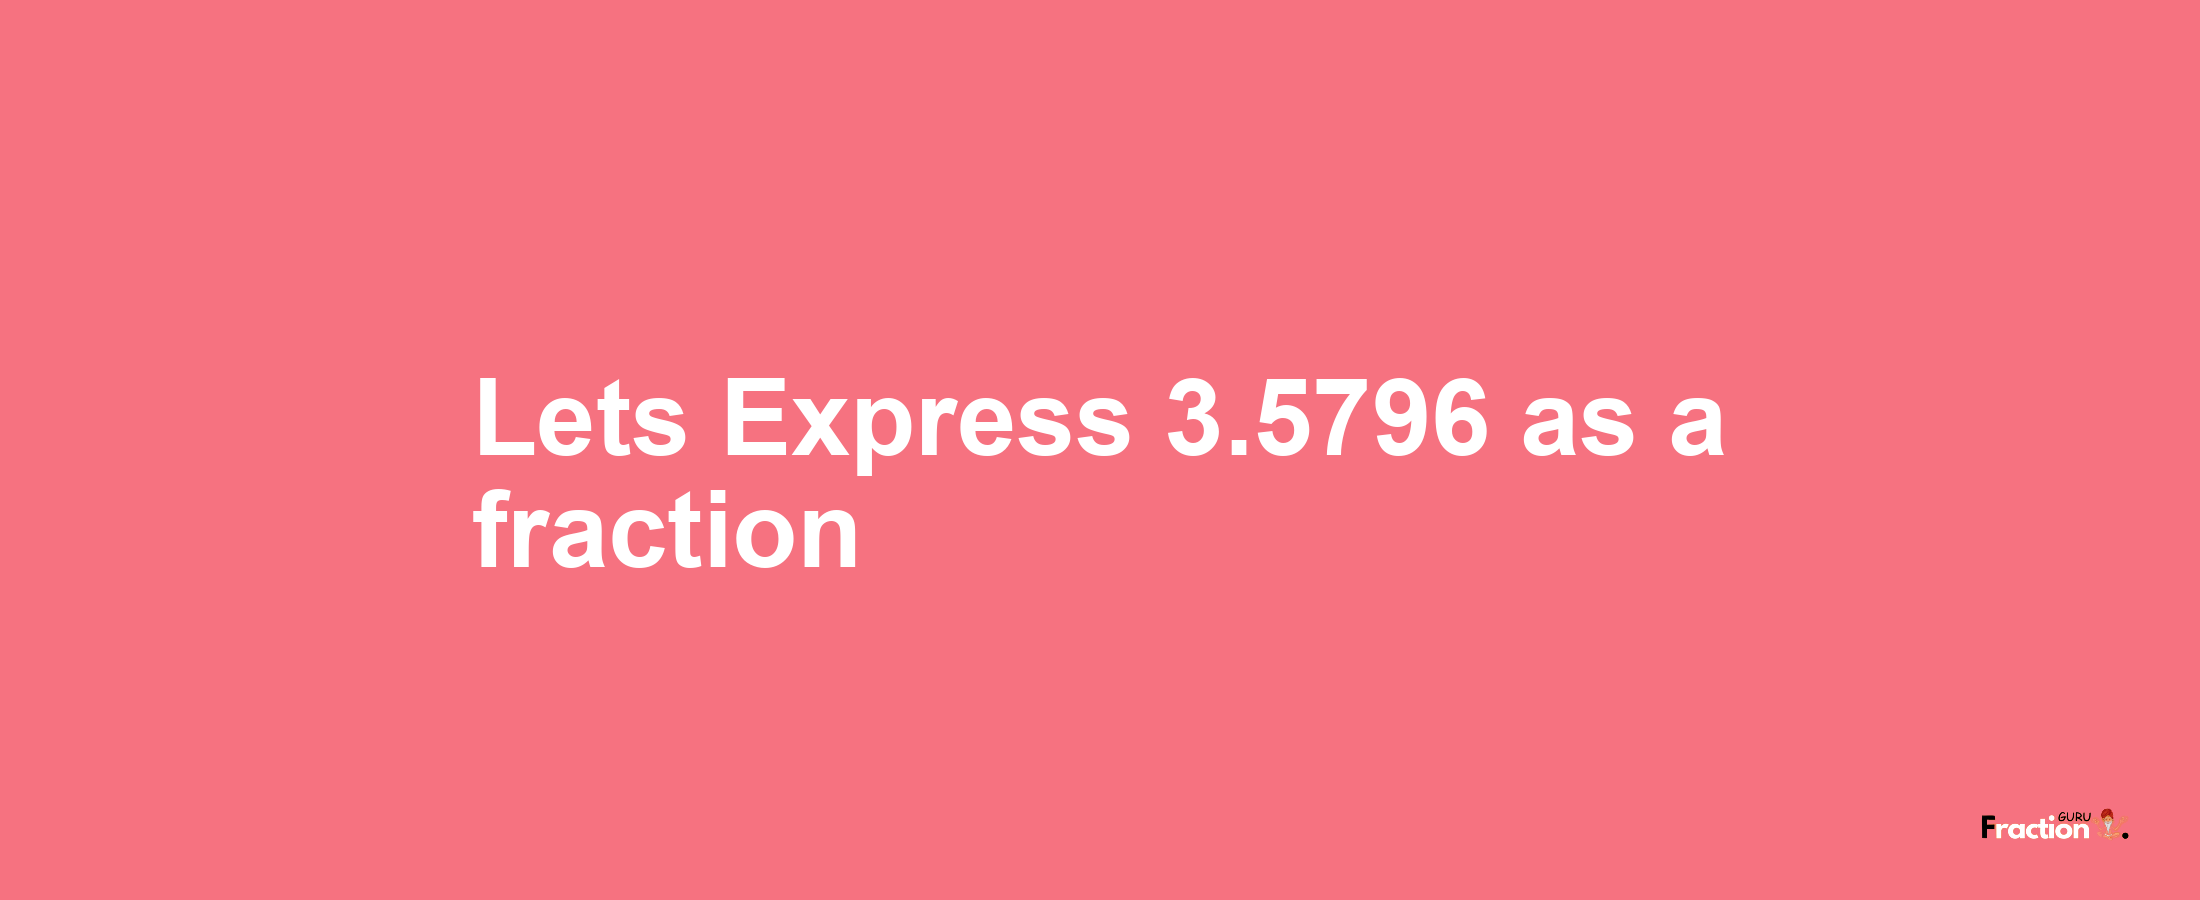 Lets Express 3.5796 as afraction